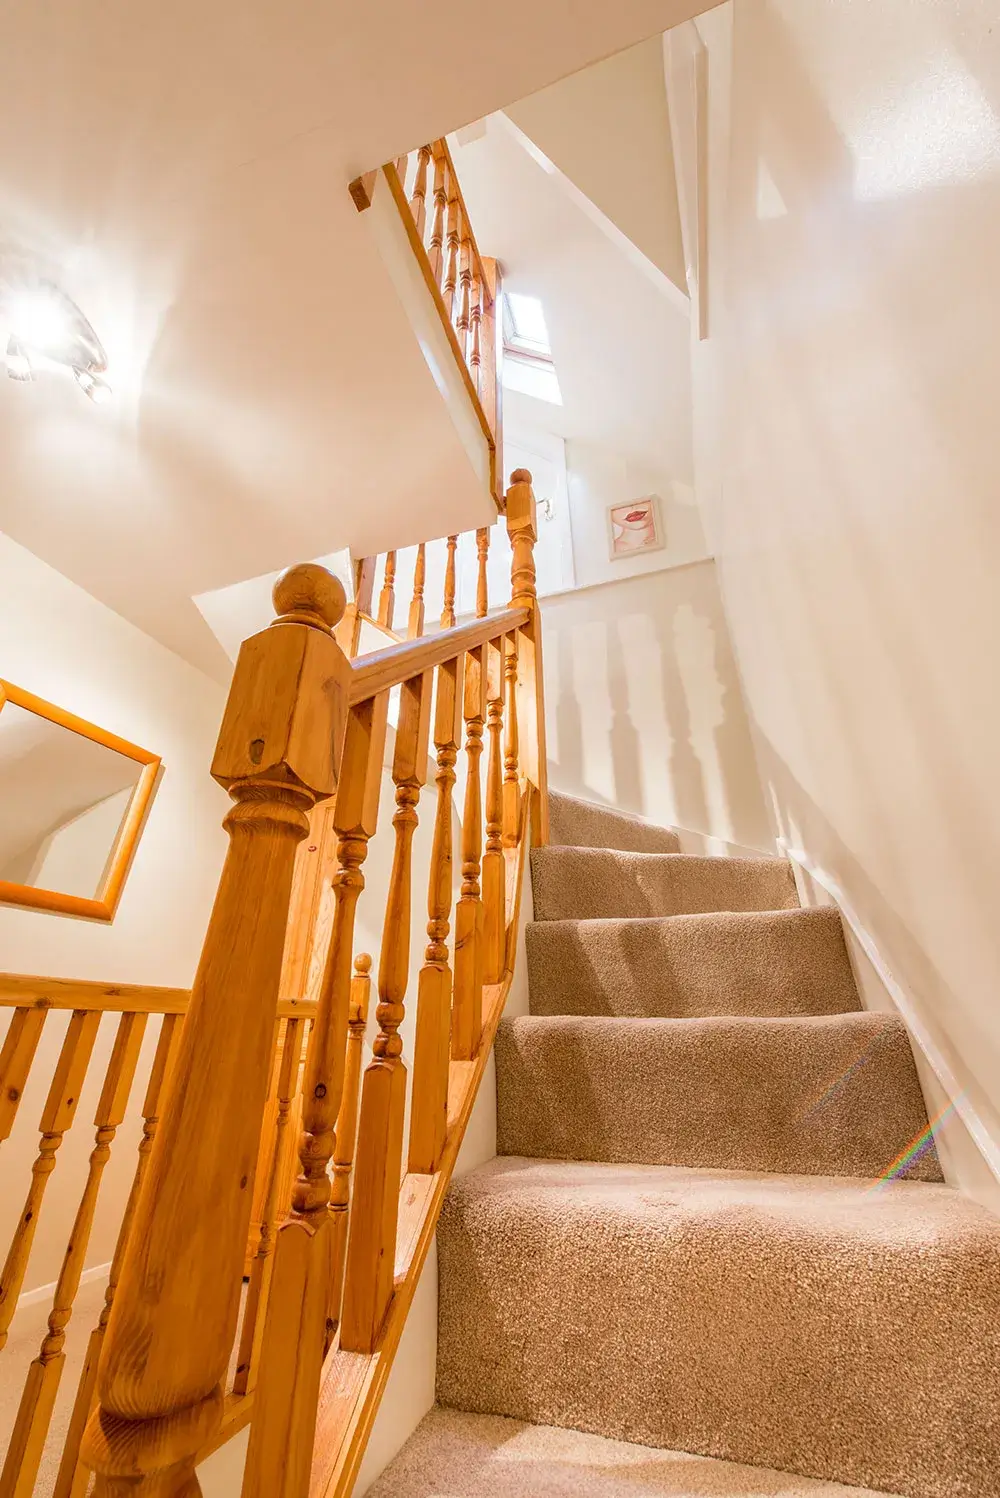 Staircase leading up to dormer attic conversion